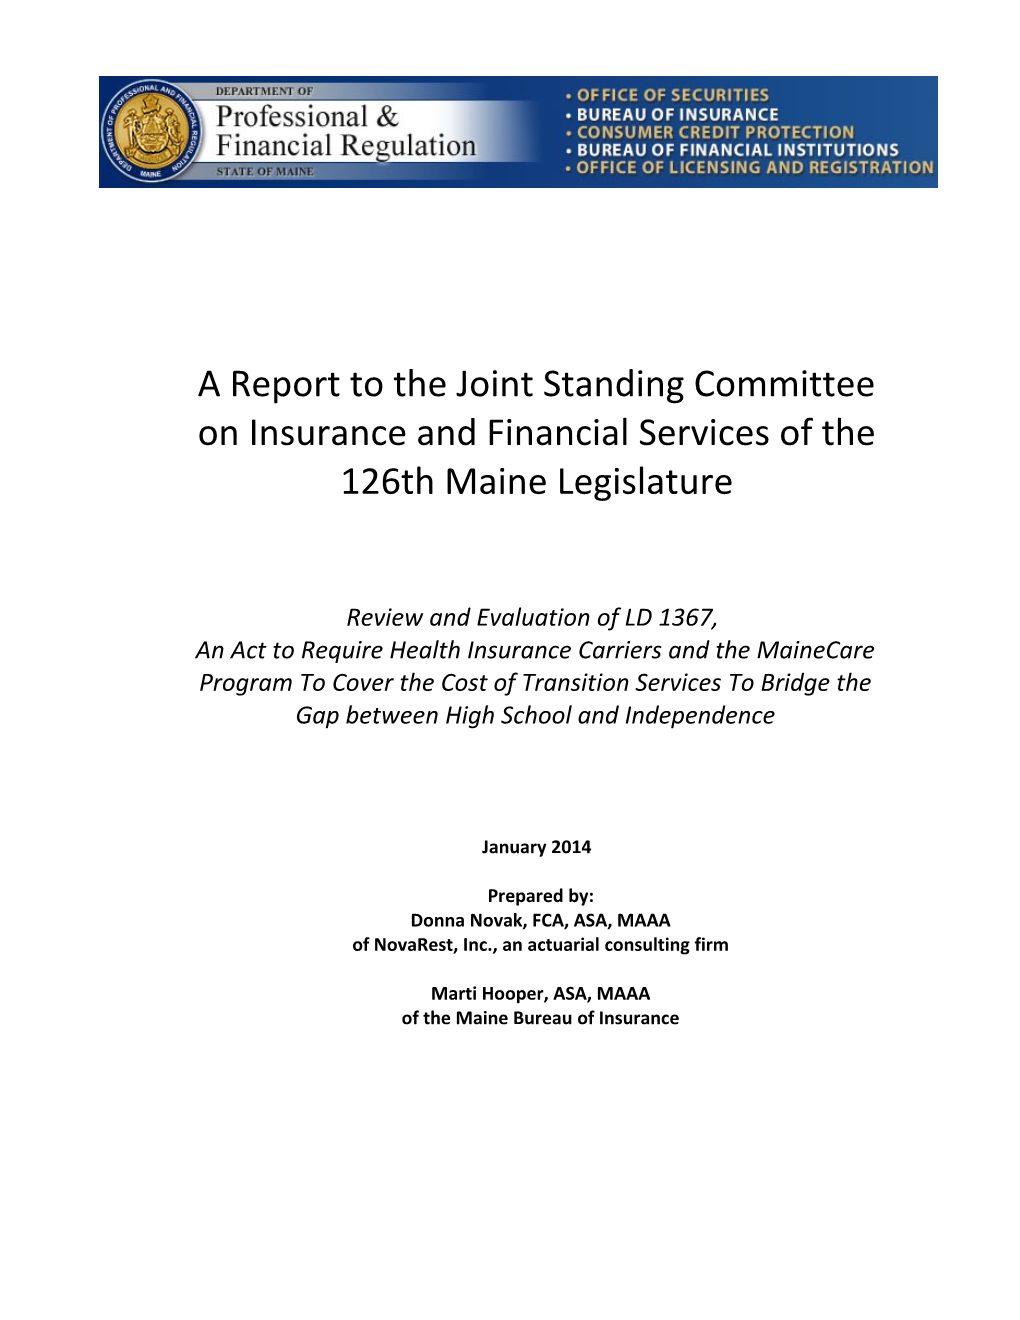 A Report to the Joint Standing Committee on Insurance and Financial Services of the 126Th